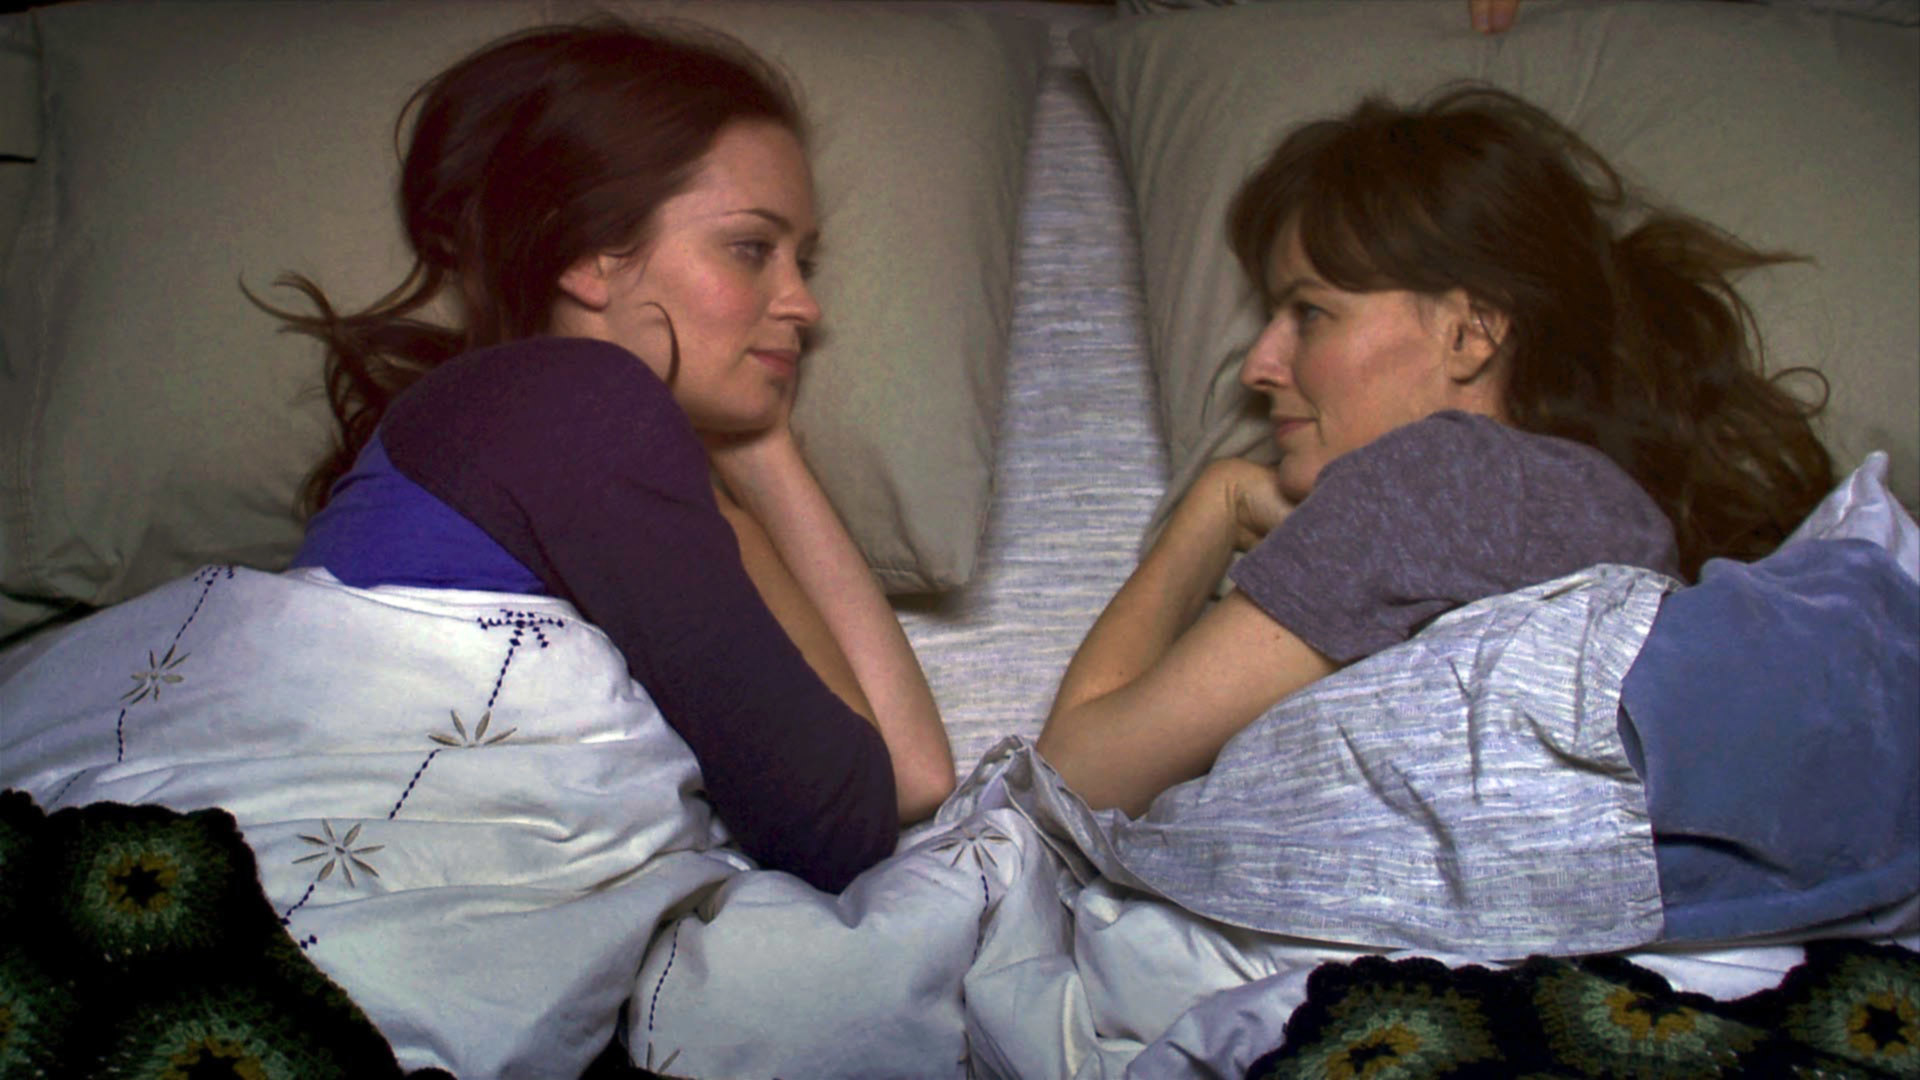 Emily Blunt and Rosemarie DeWitt staring at each other in bed.